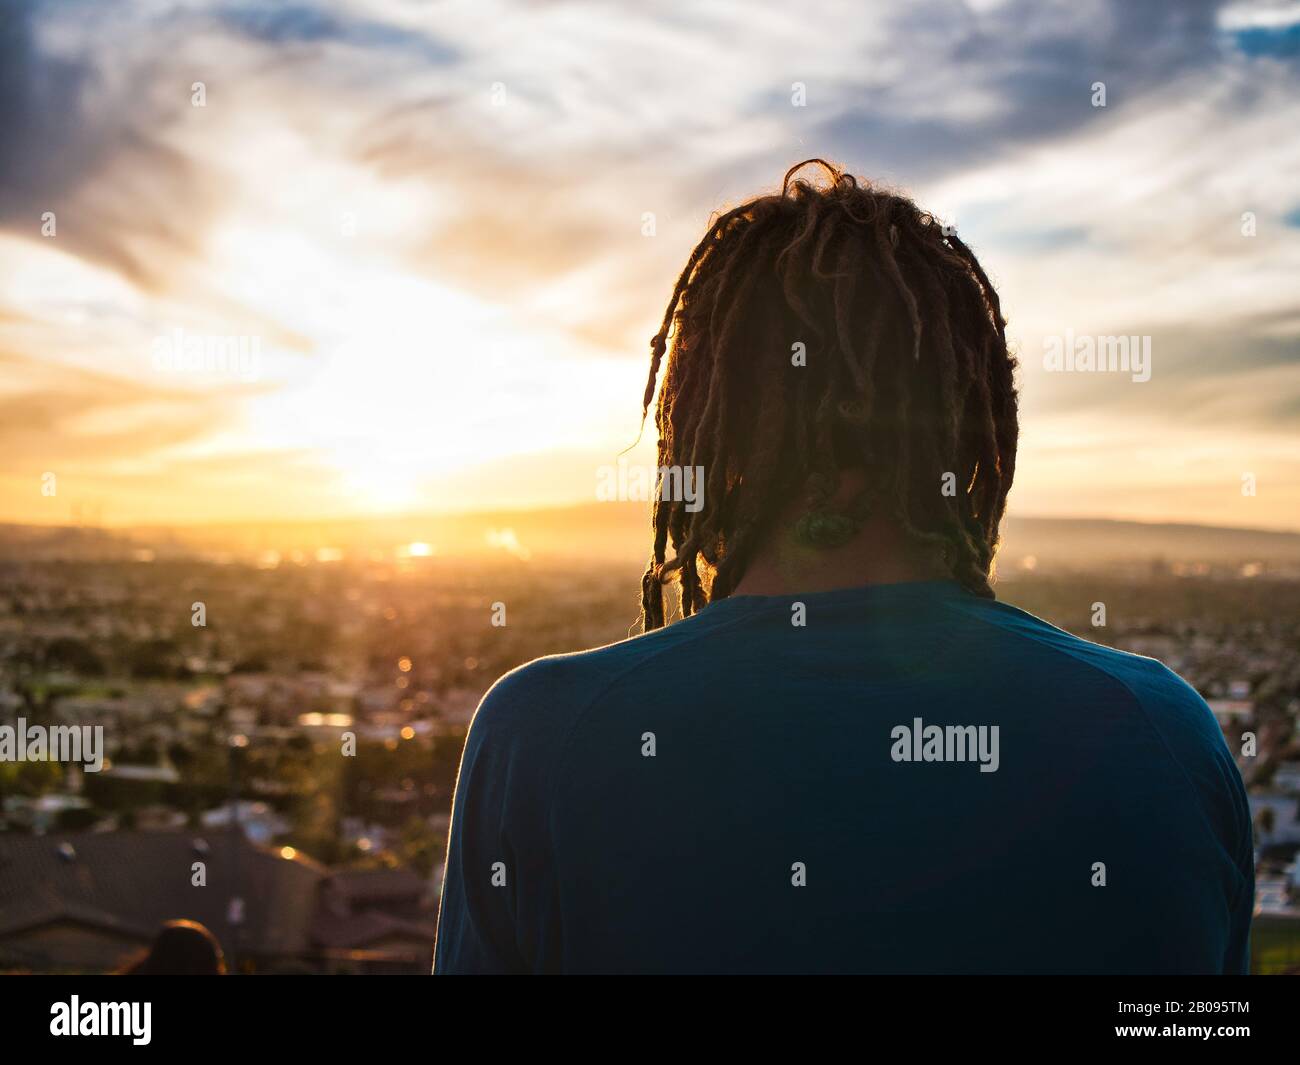 Unrecognizable man with dreadlocks admiring nature during sunset Stock Photo